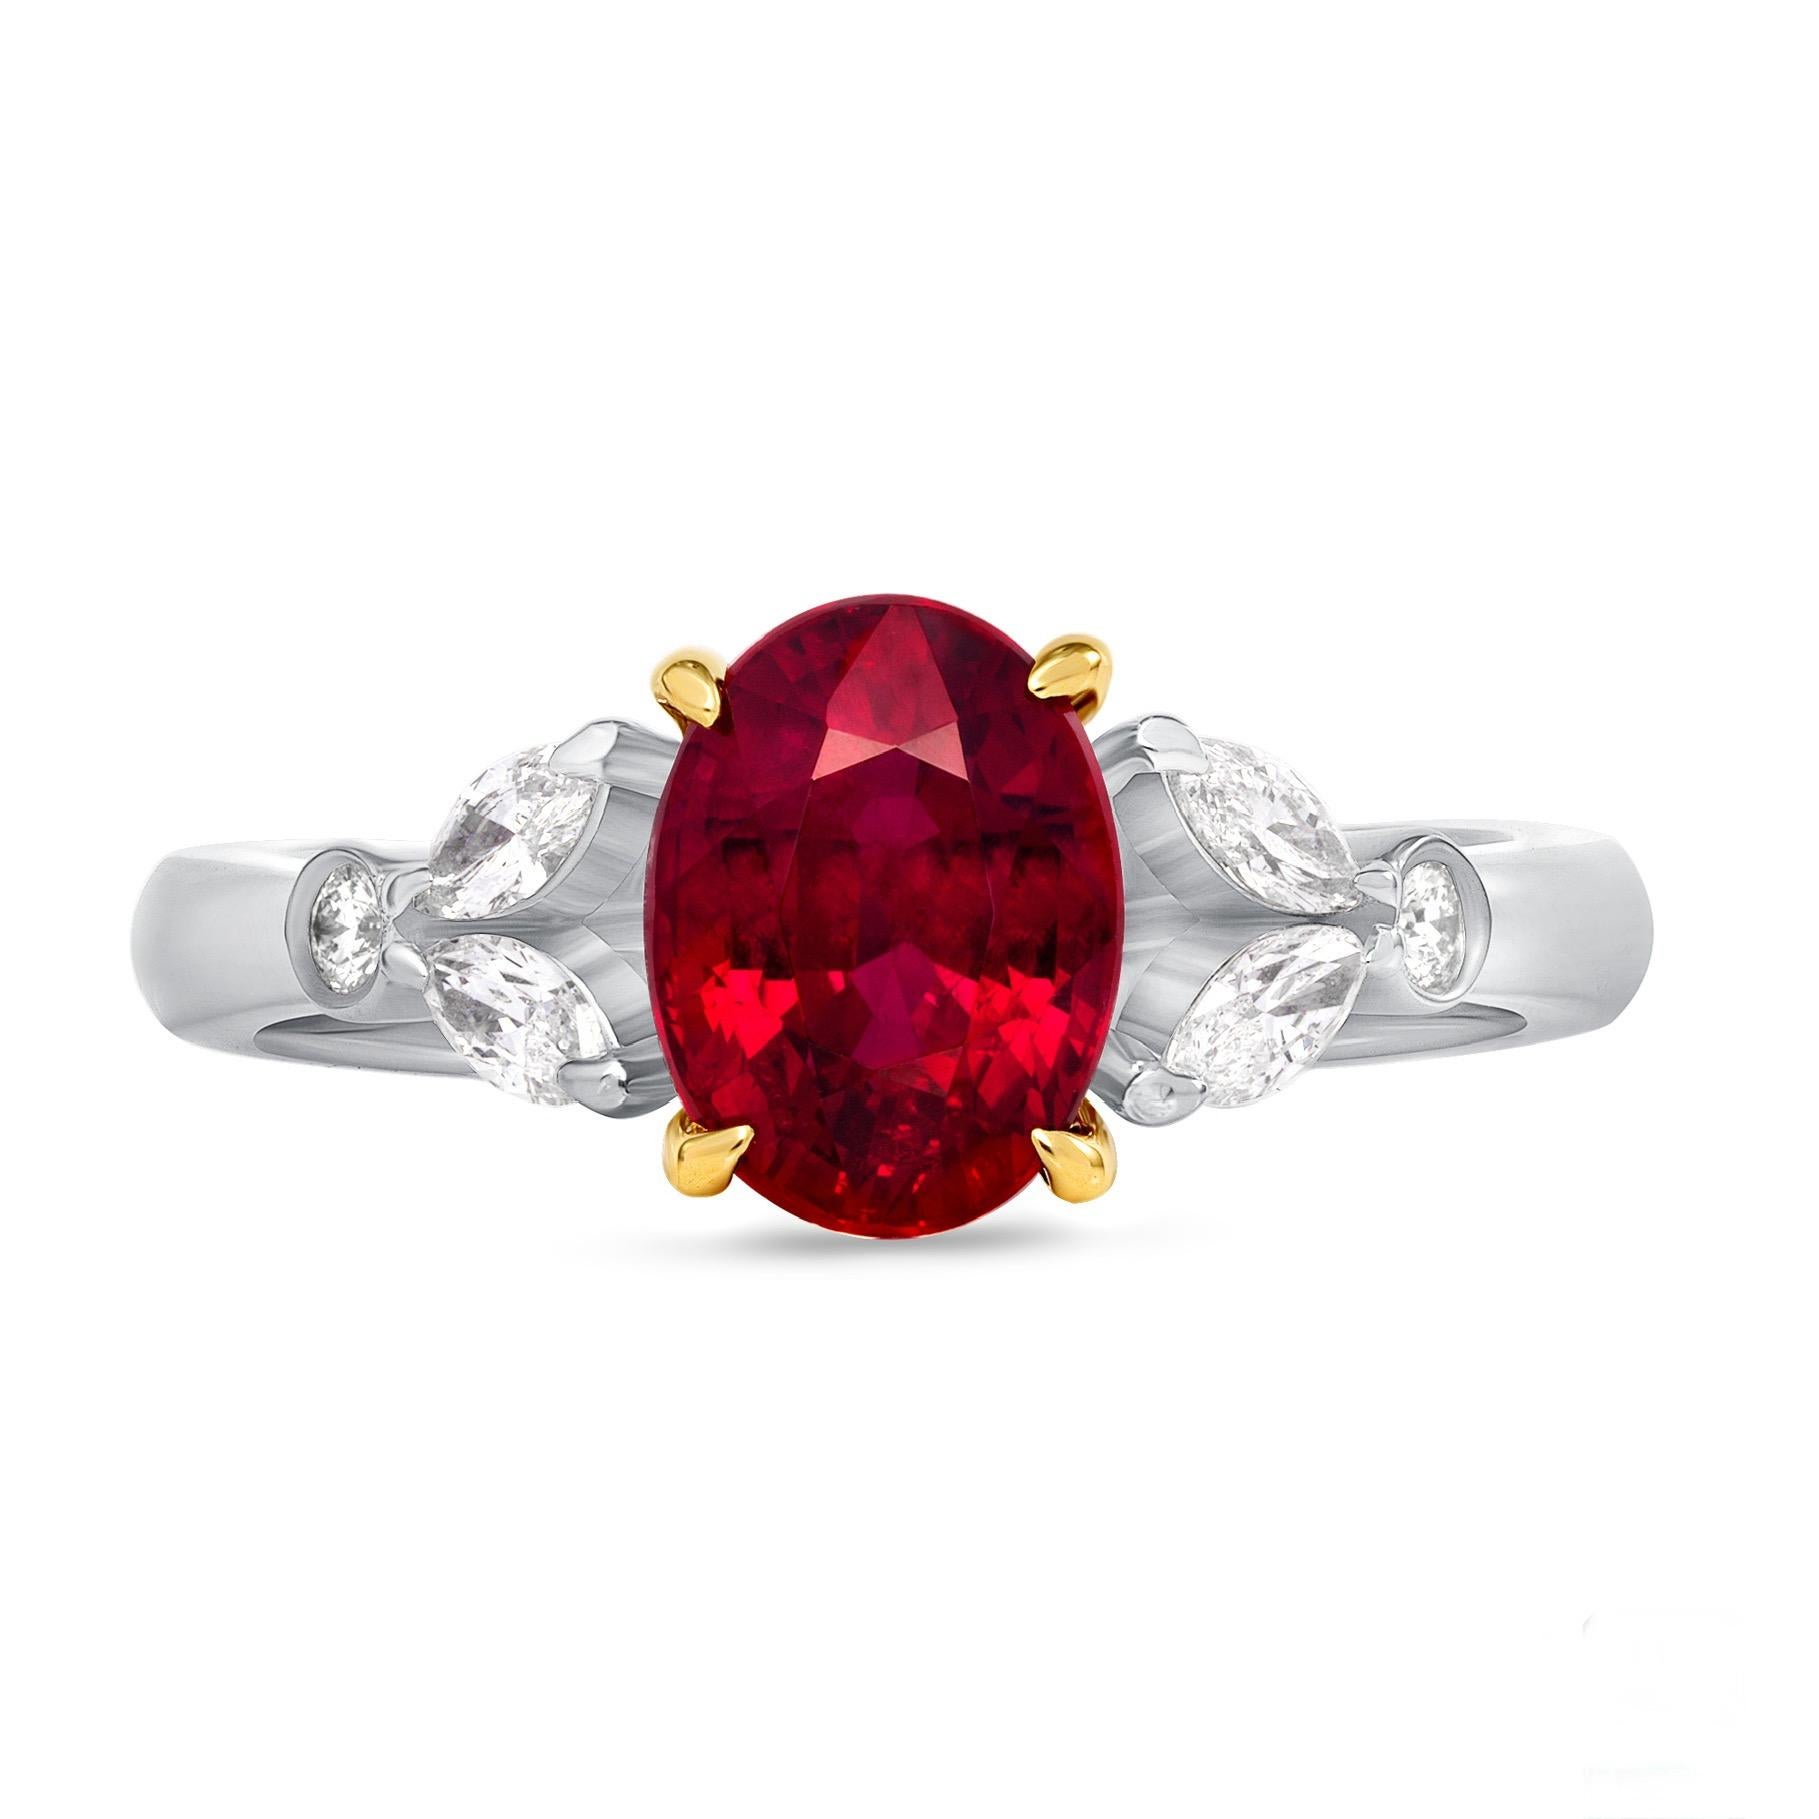 Oval Cut 2.03ct oval, Mozambique Ruby ring. GIA certified. For Sale